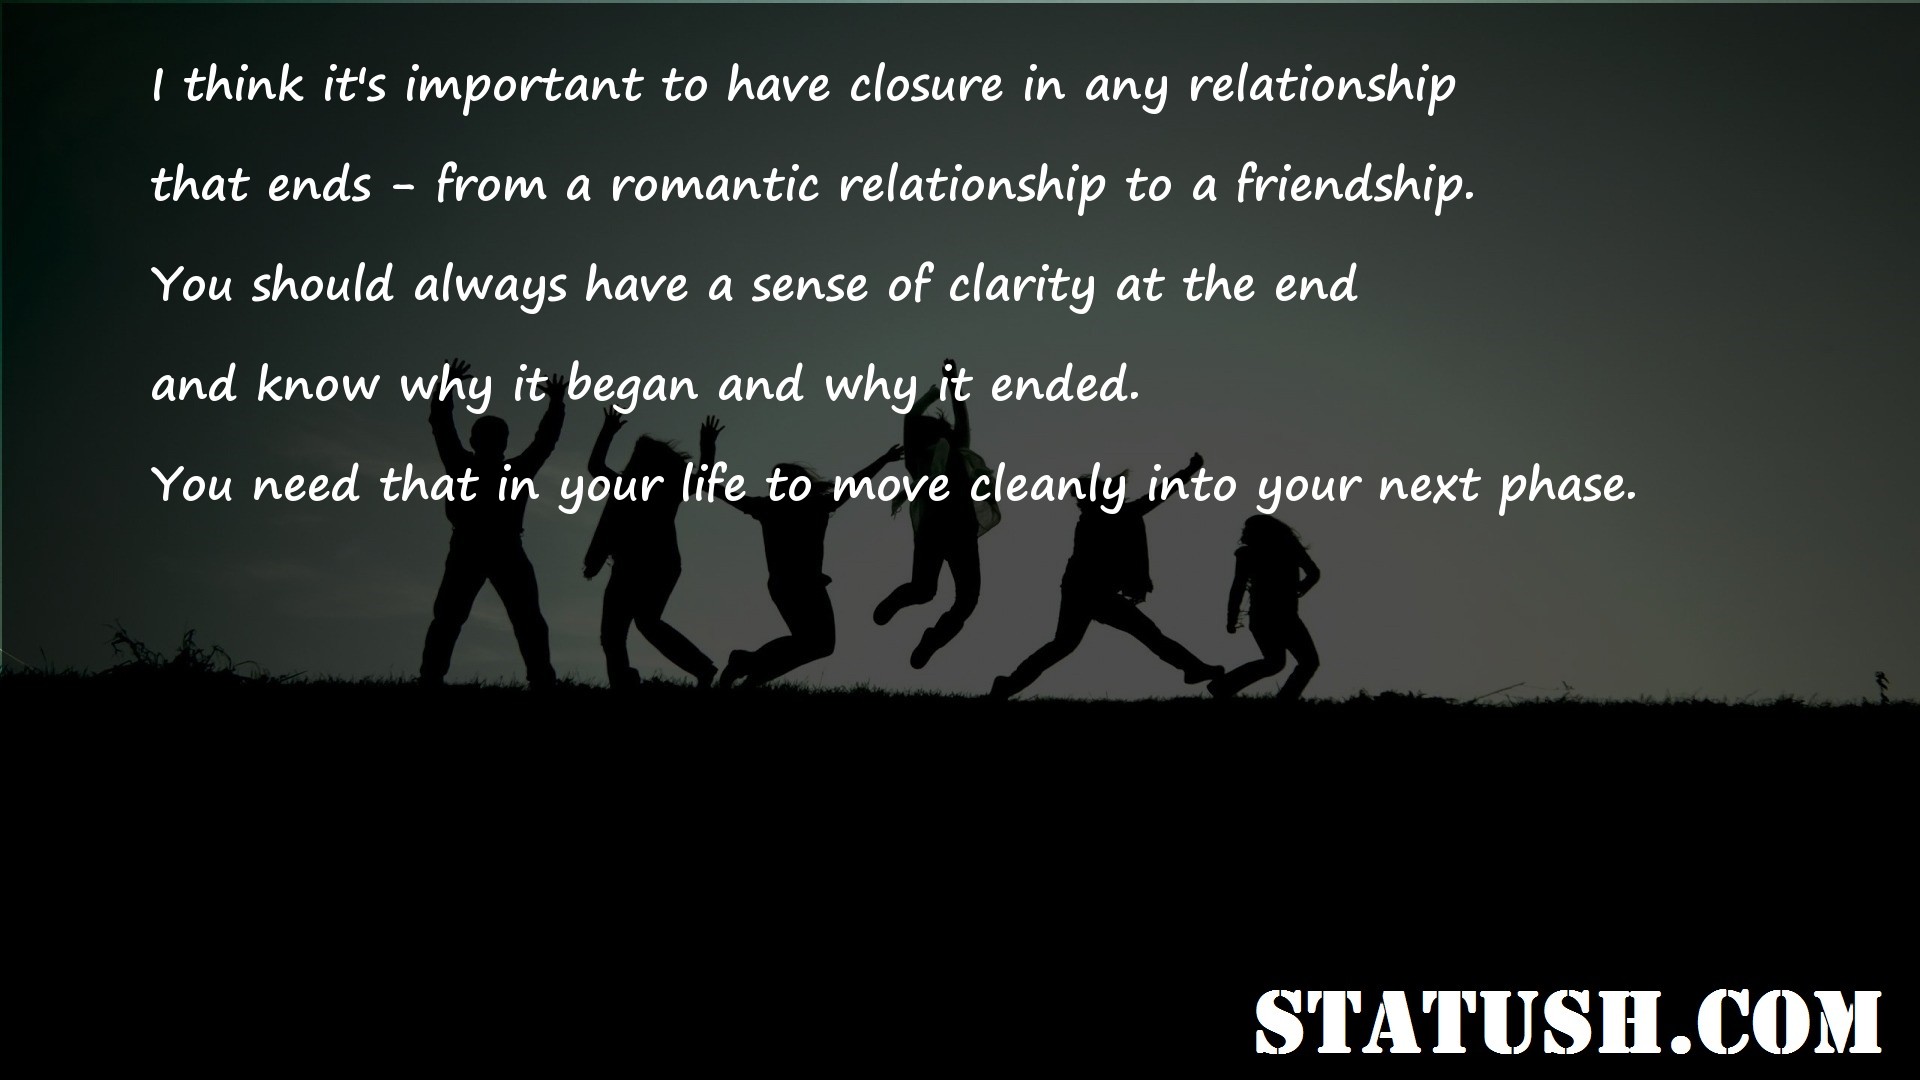 I think its important to have closure in any relationship Friendship Quotes at statush.com